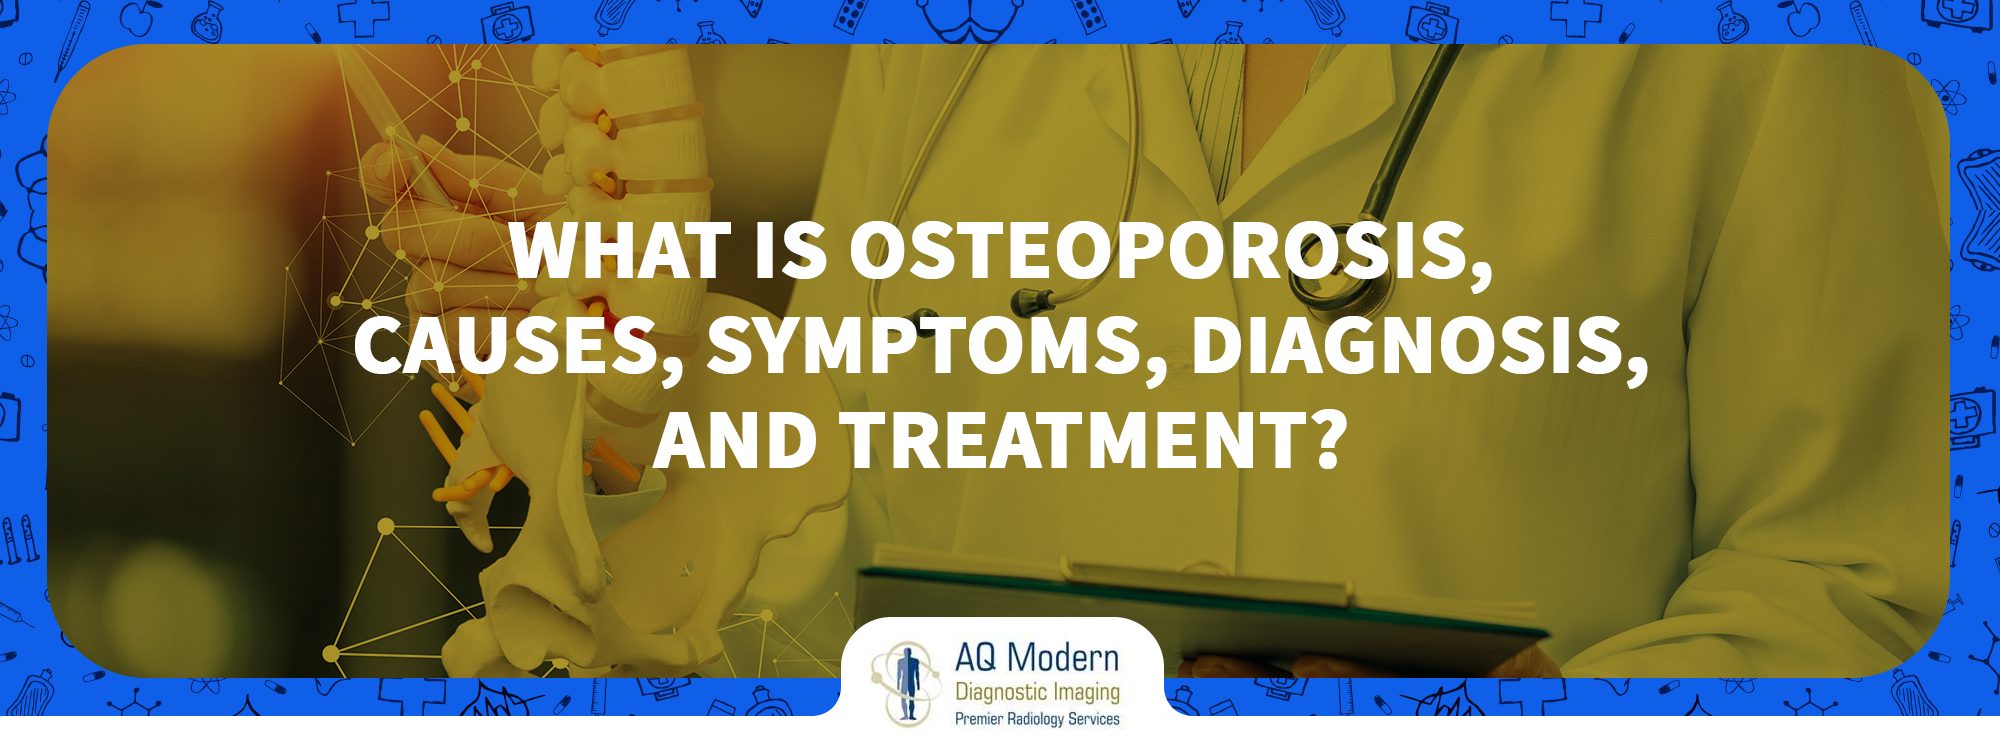 What is Osteoporosis, Causes, Symptoms, Diagnosis, and Treatment